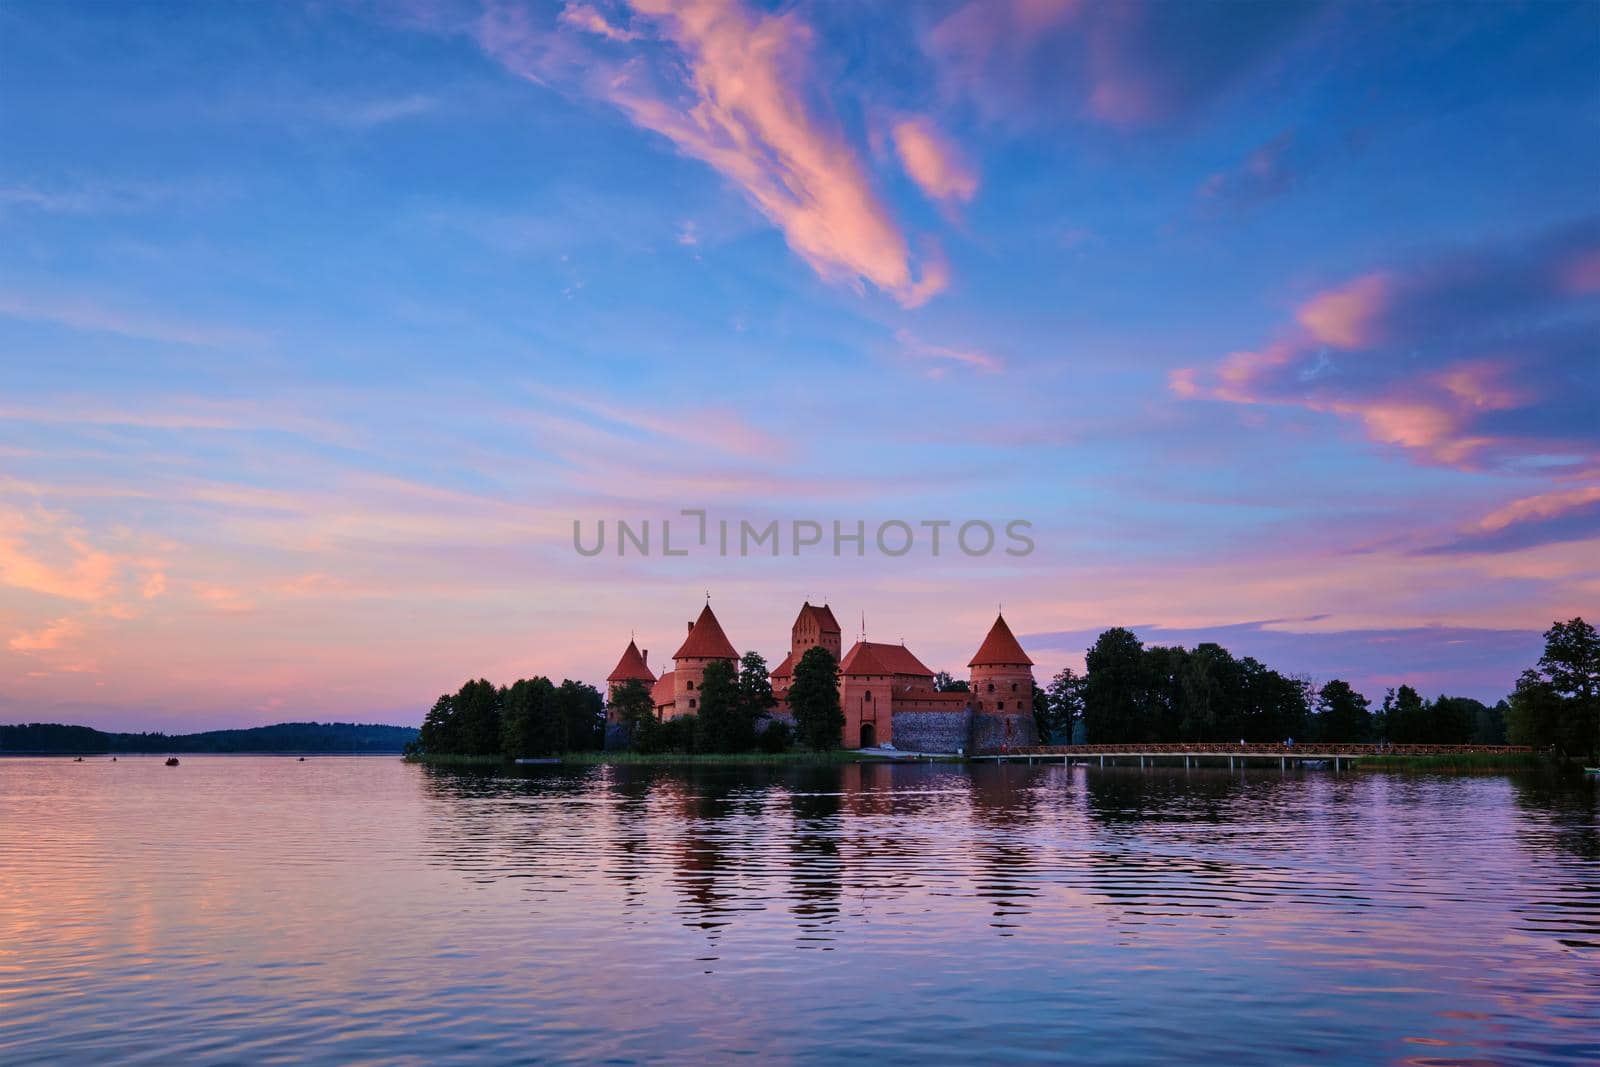 Trakai Island Castle in lake Galve, Lithuania on sunset with dramatic sky reflecting in water. Trakai Castle is one of major tourist attractions of Lituania